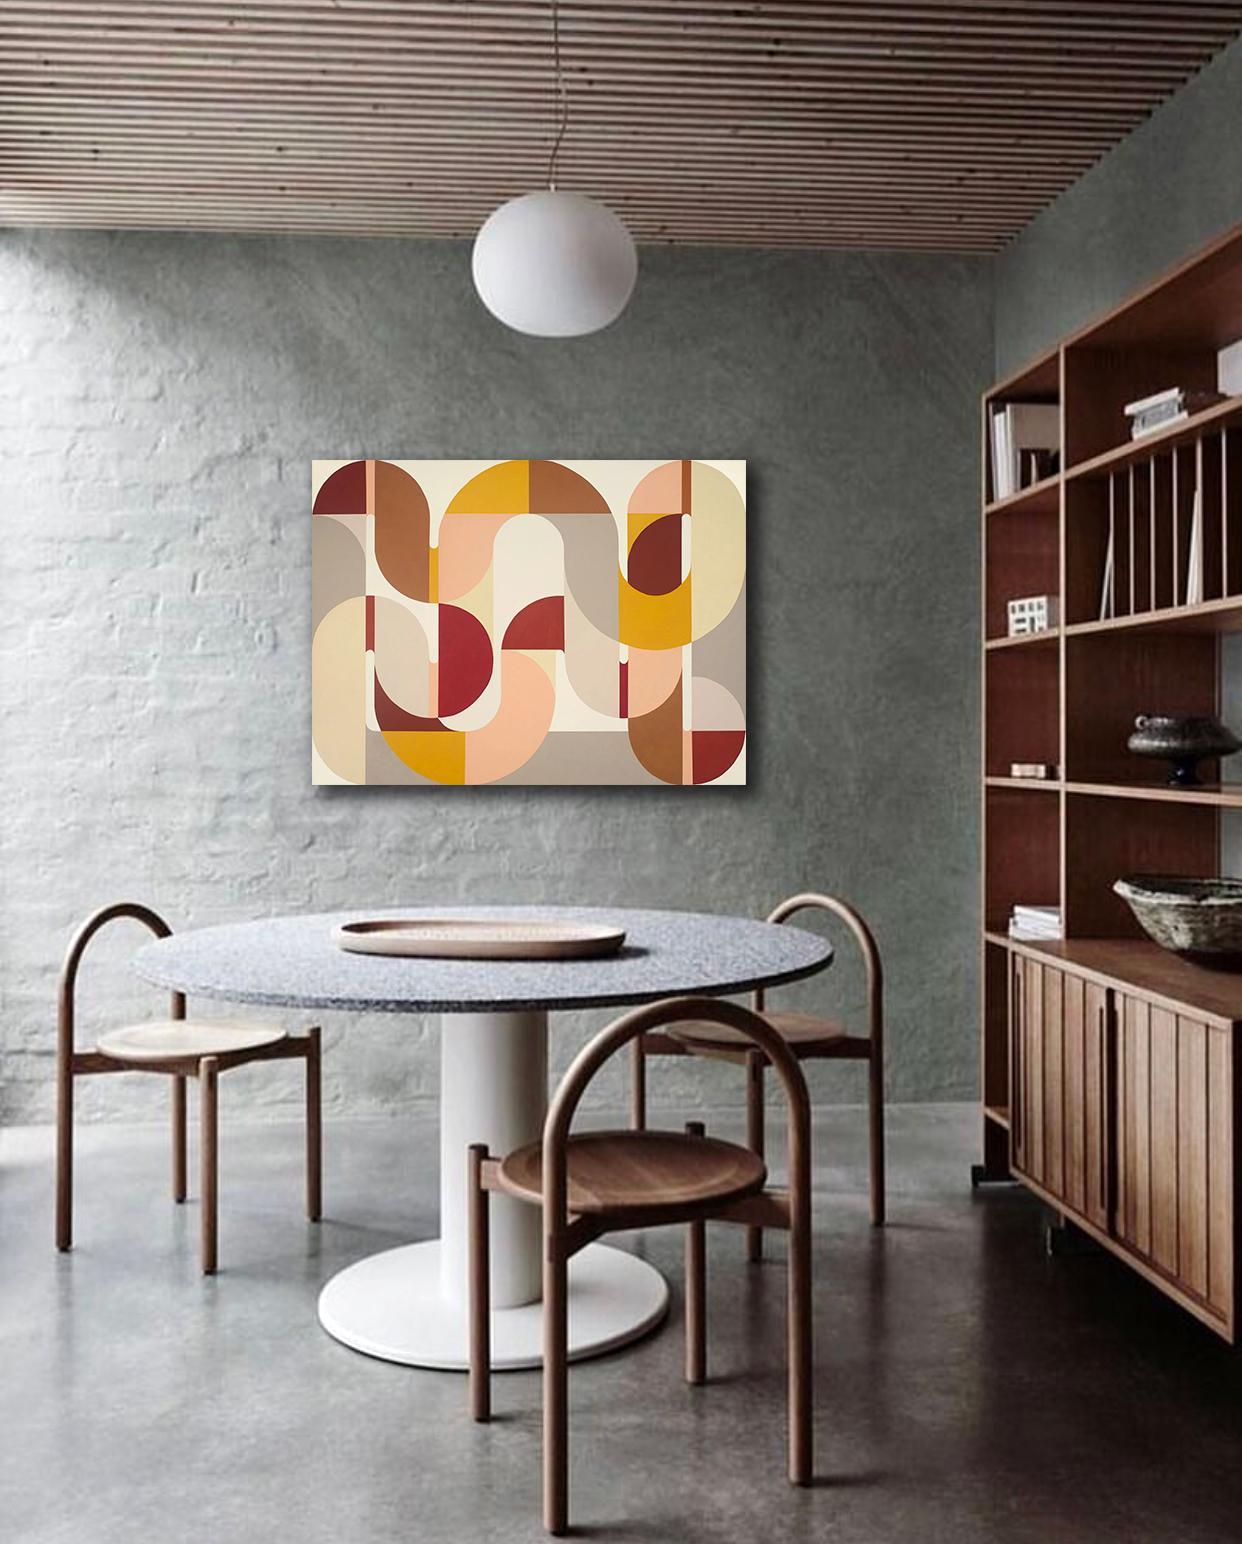 Desert Bloom, geometric abstract painting, mid-century modern earth tone palette - Abstract Mixed Media Art by Kazaan Viveiros